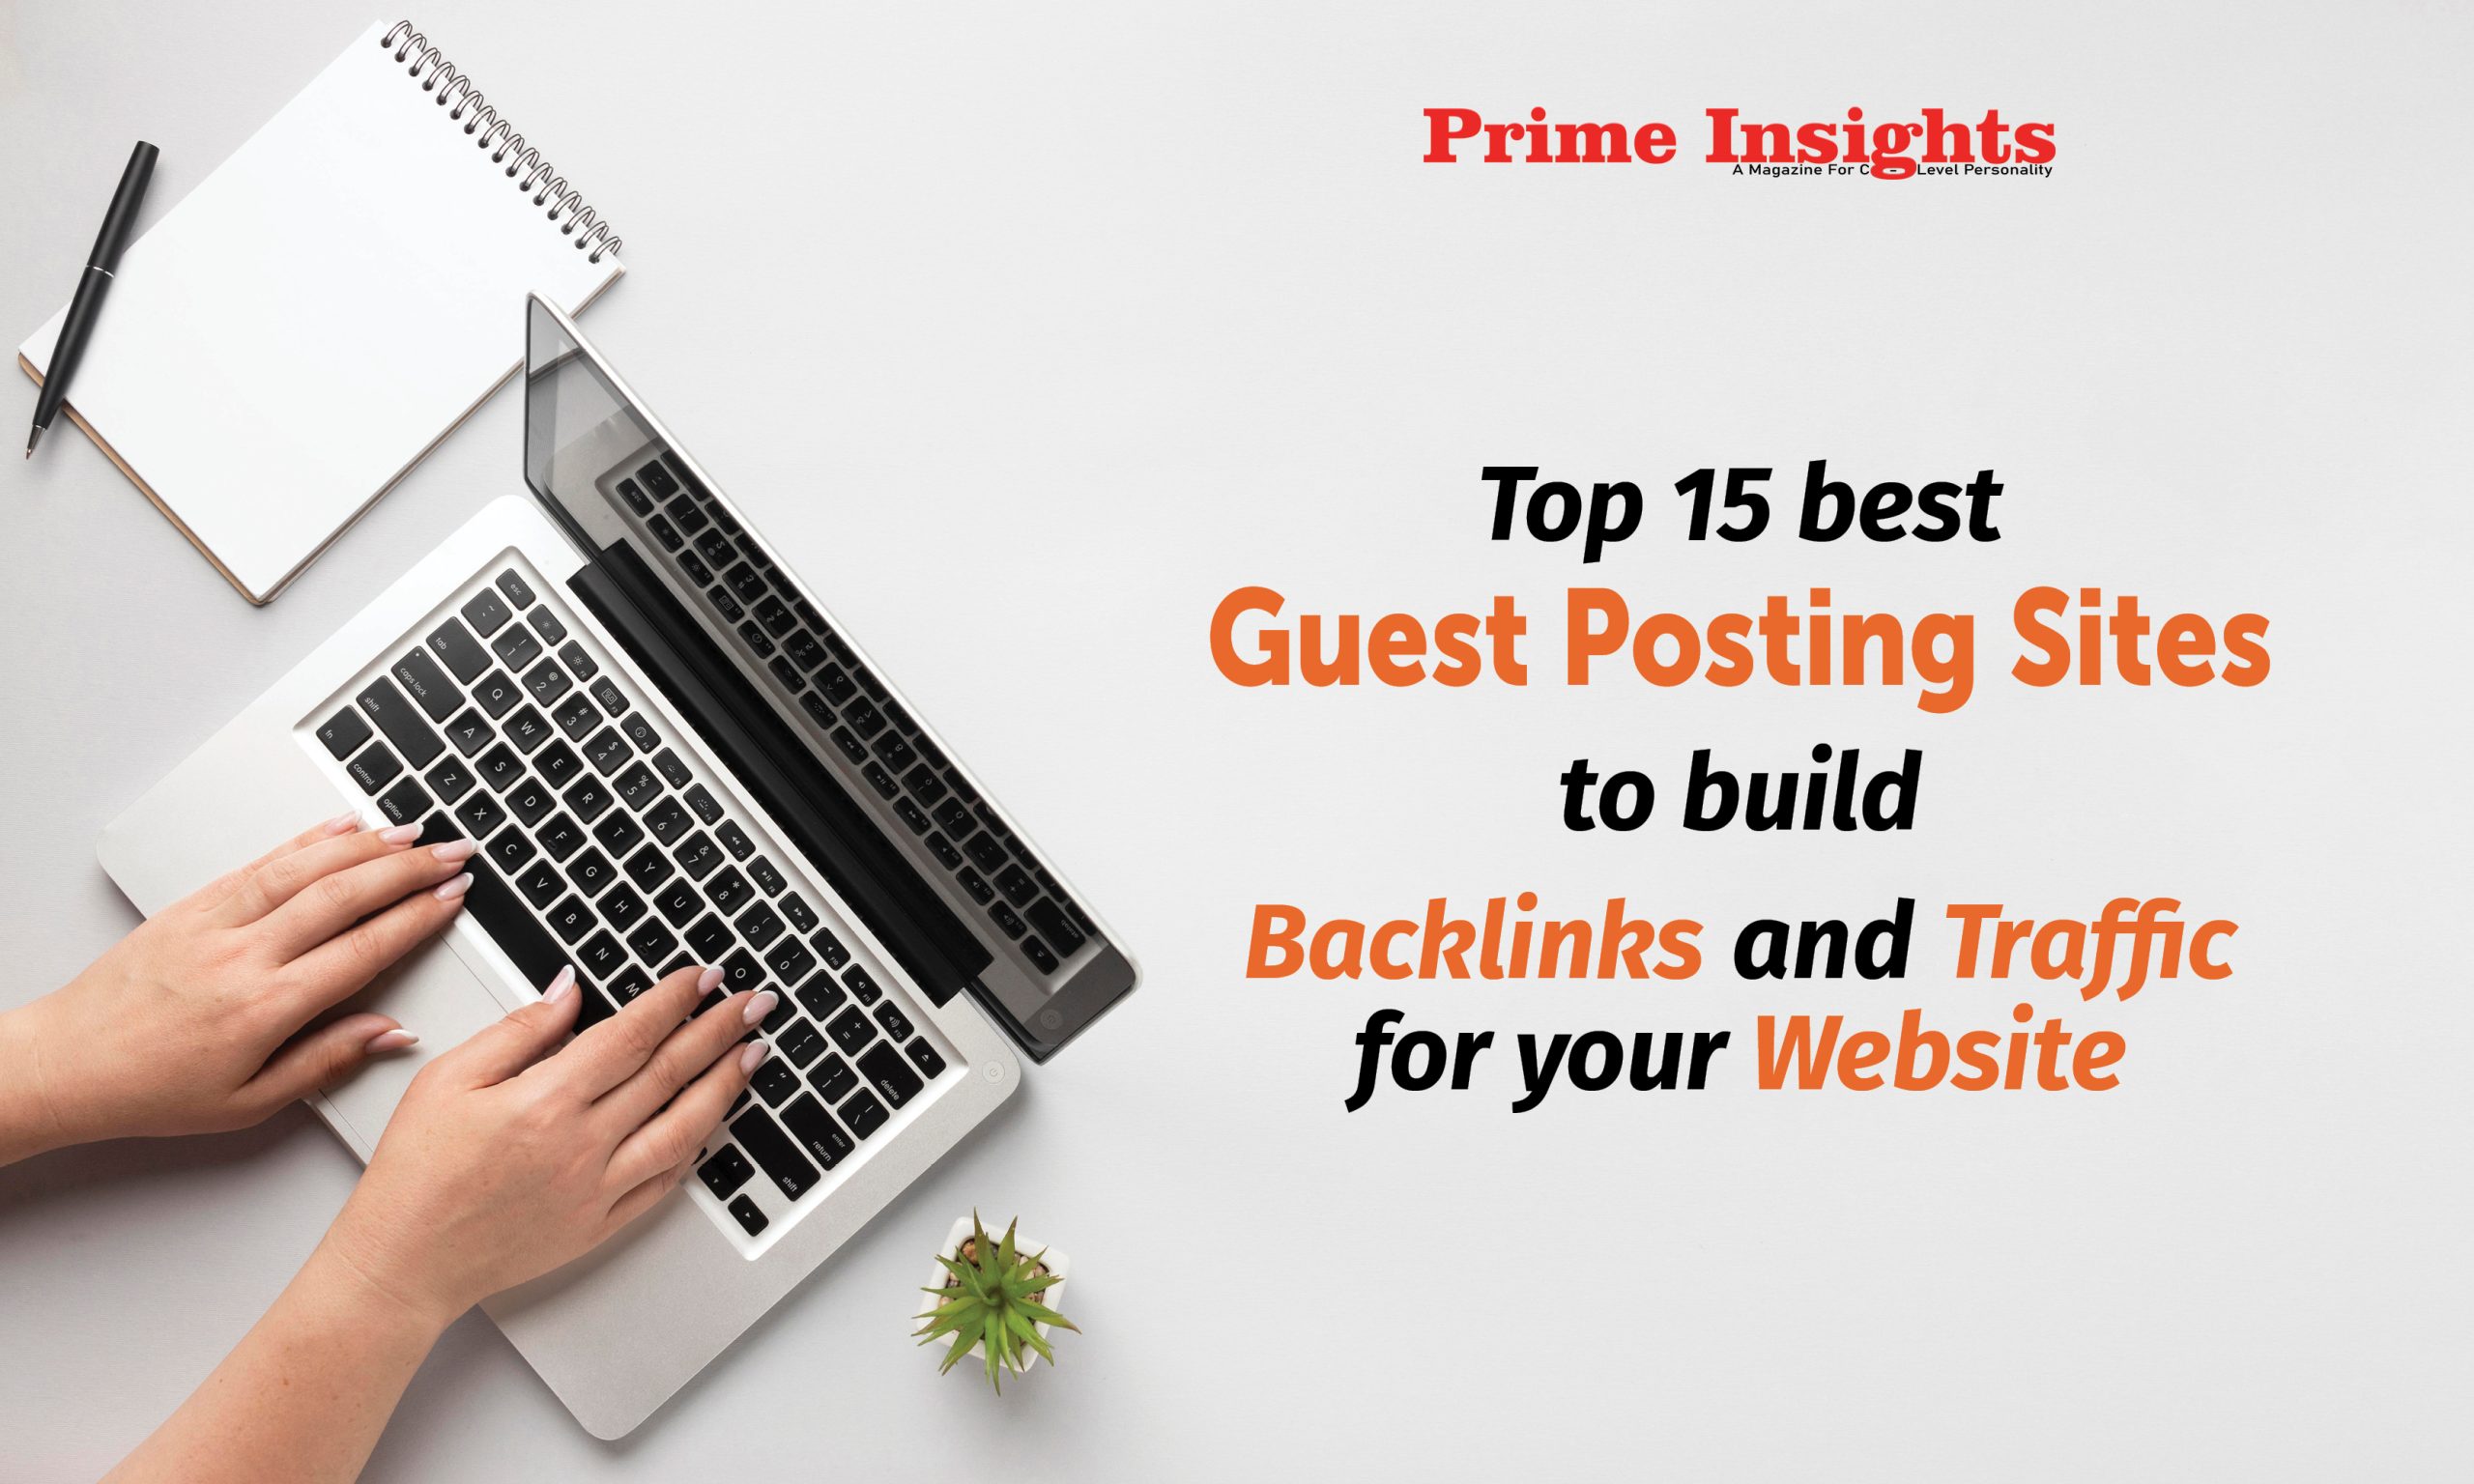 Top 15 Best Guest Posting Sites To Build Backlinks And Traffic For Your Website